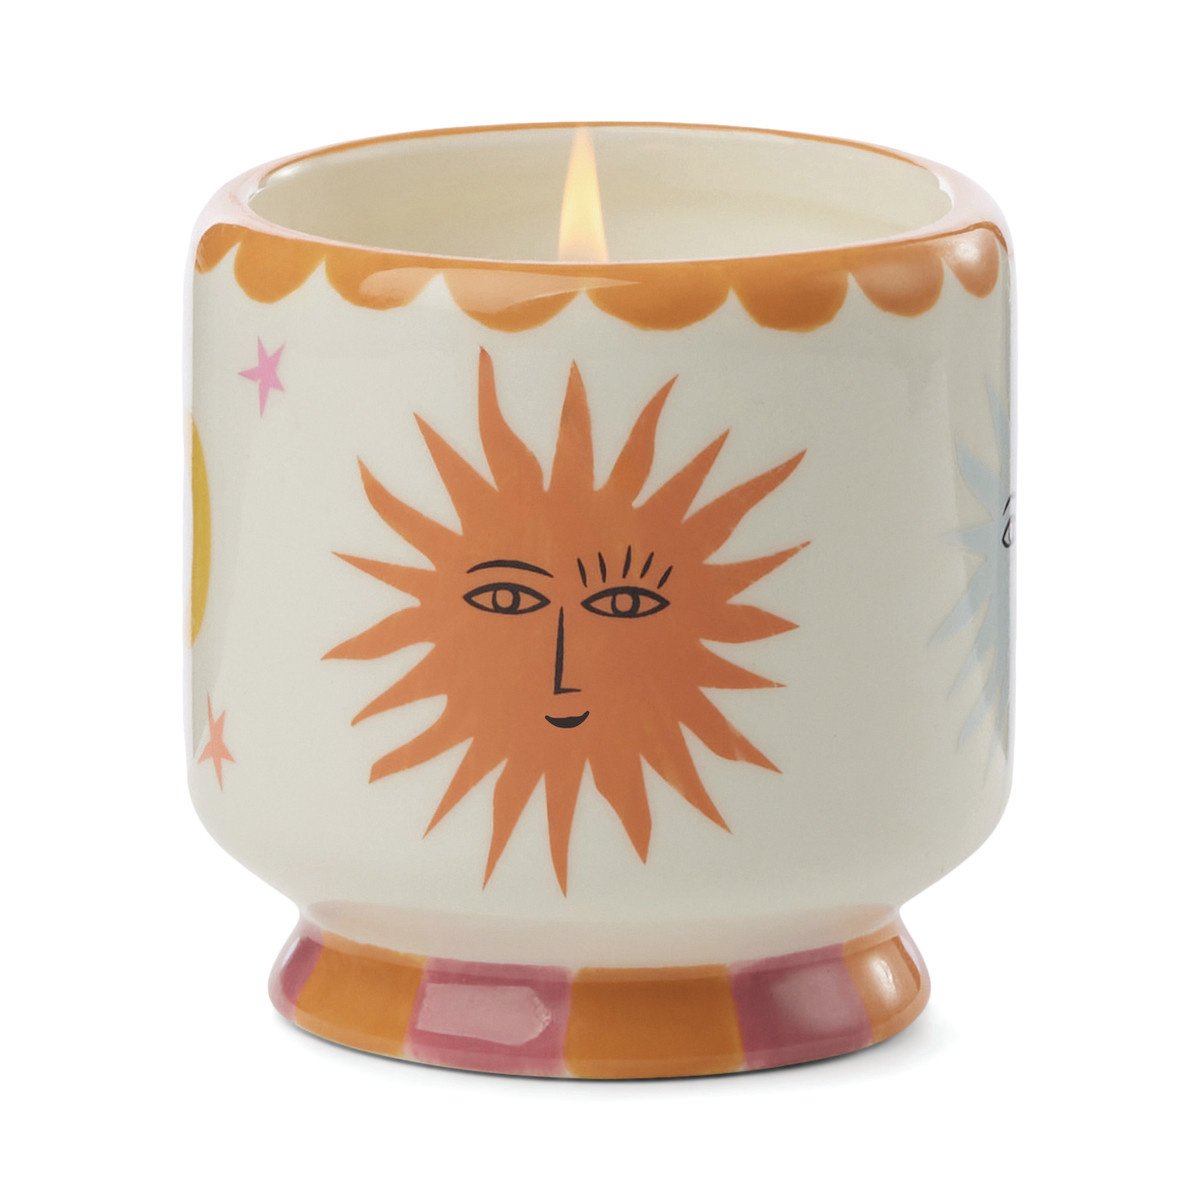 Paddywax - PA PA CALA - Orange Blossom Sun Candle, A Dopo Collection